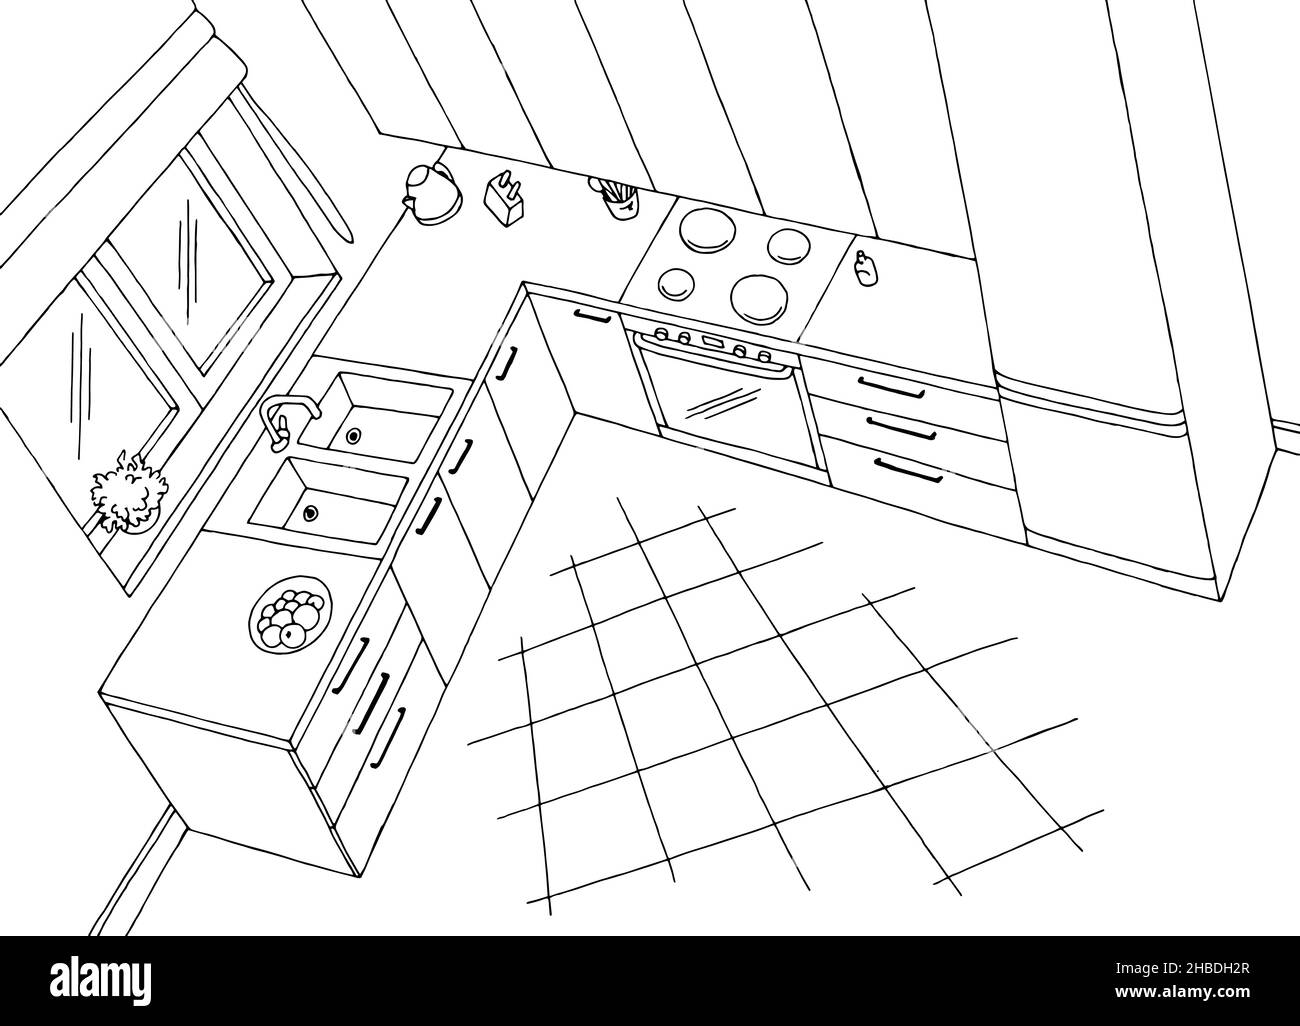 Kitchen room interior top view from above aerial black white graphic sketch illustration vector Stock Vector